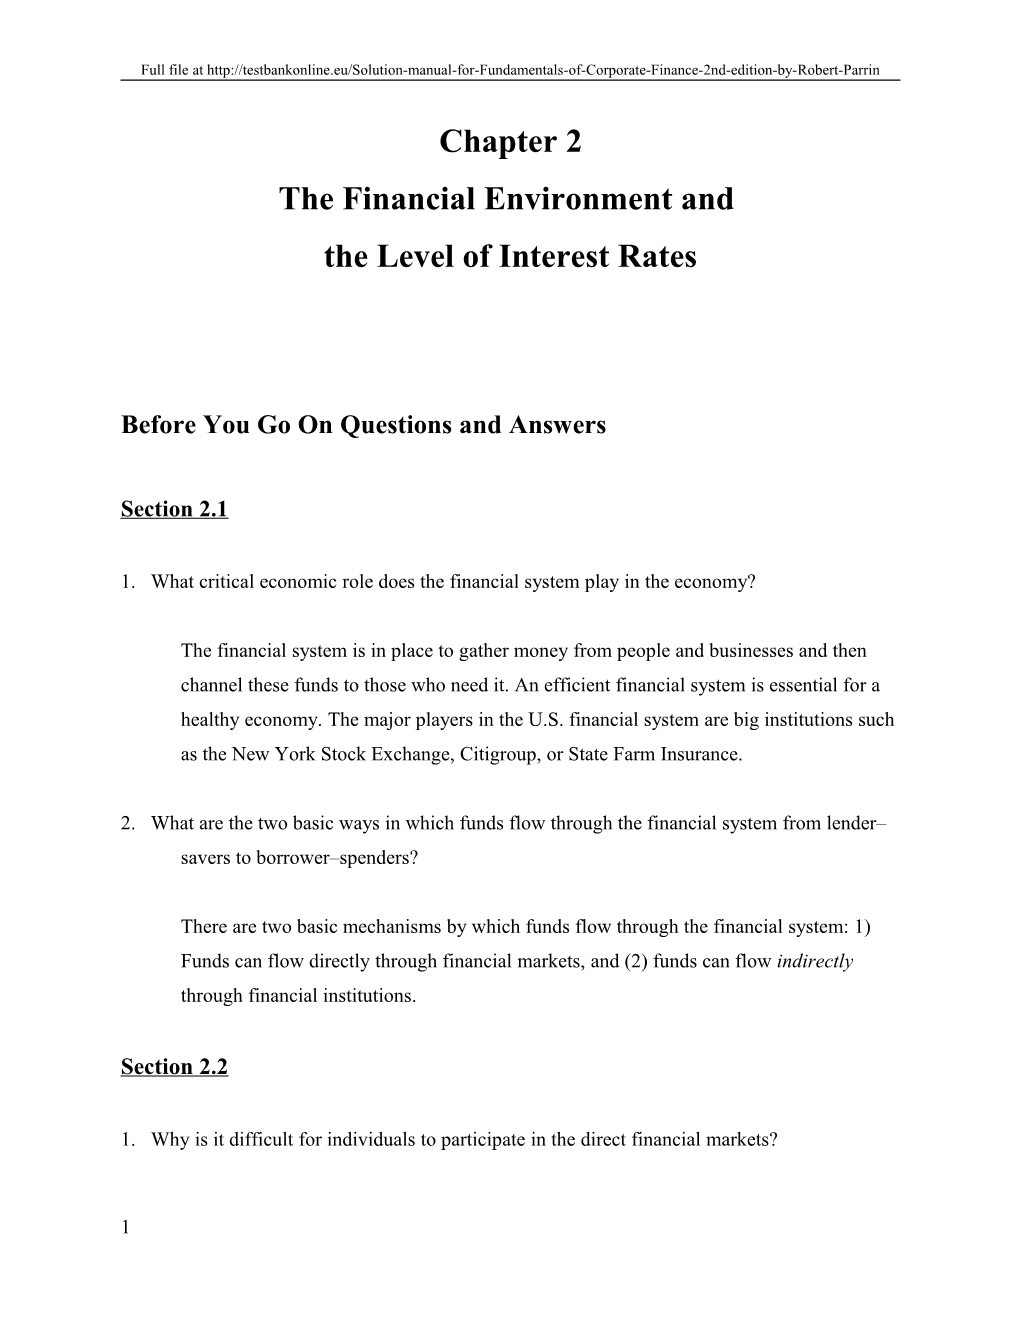 The Financial Environment and the Level of Interest Rates